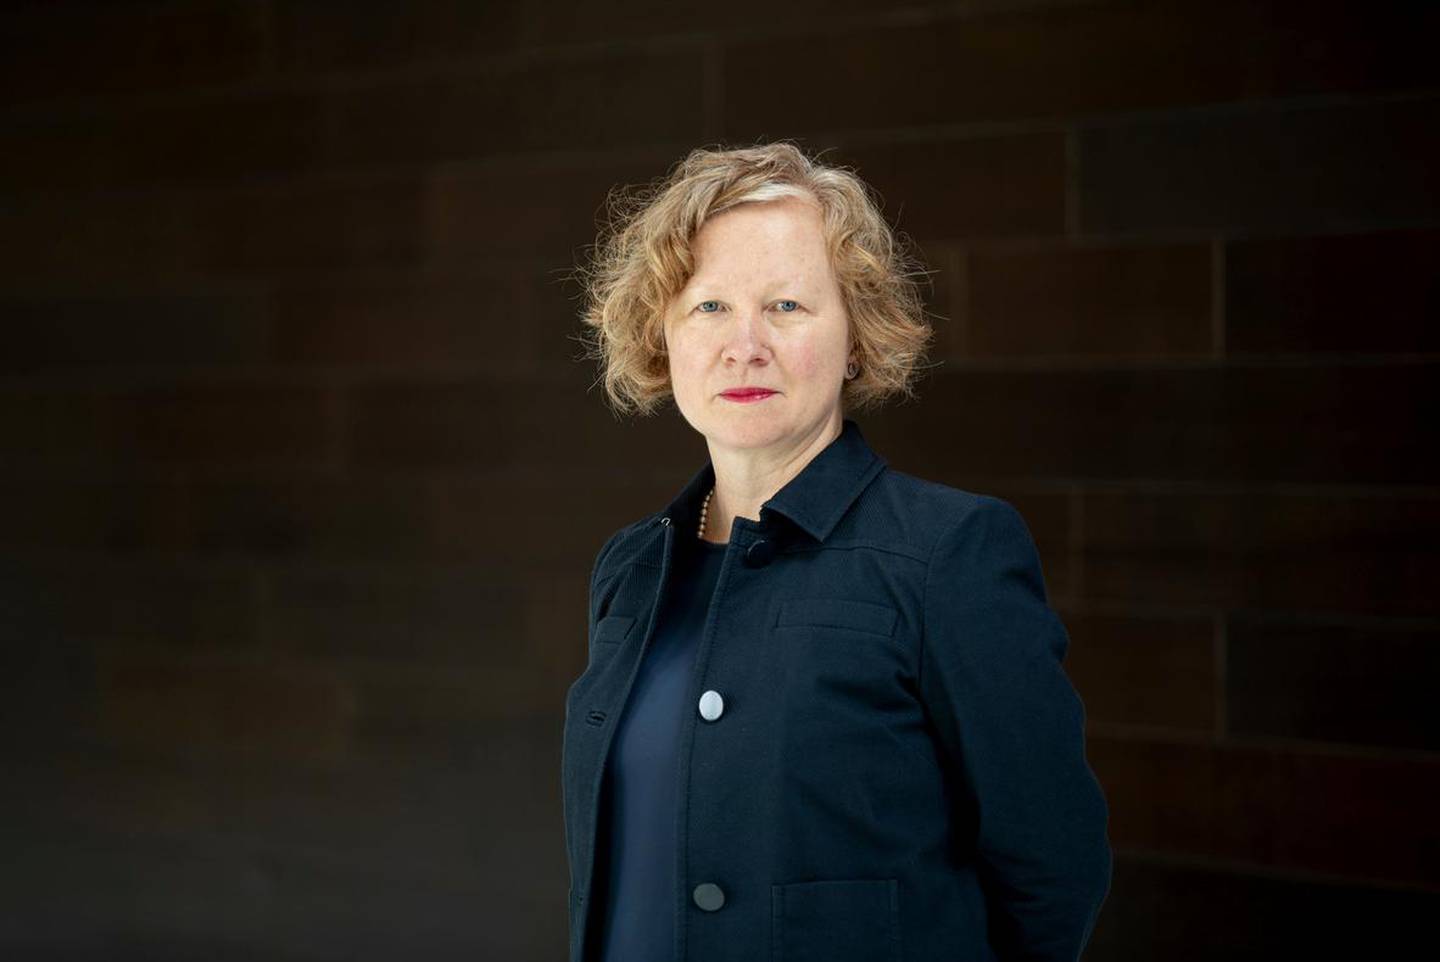 Maya Allison is the executive director of the NYUAD Art Gallery and the university's chief curator. NYUAD